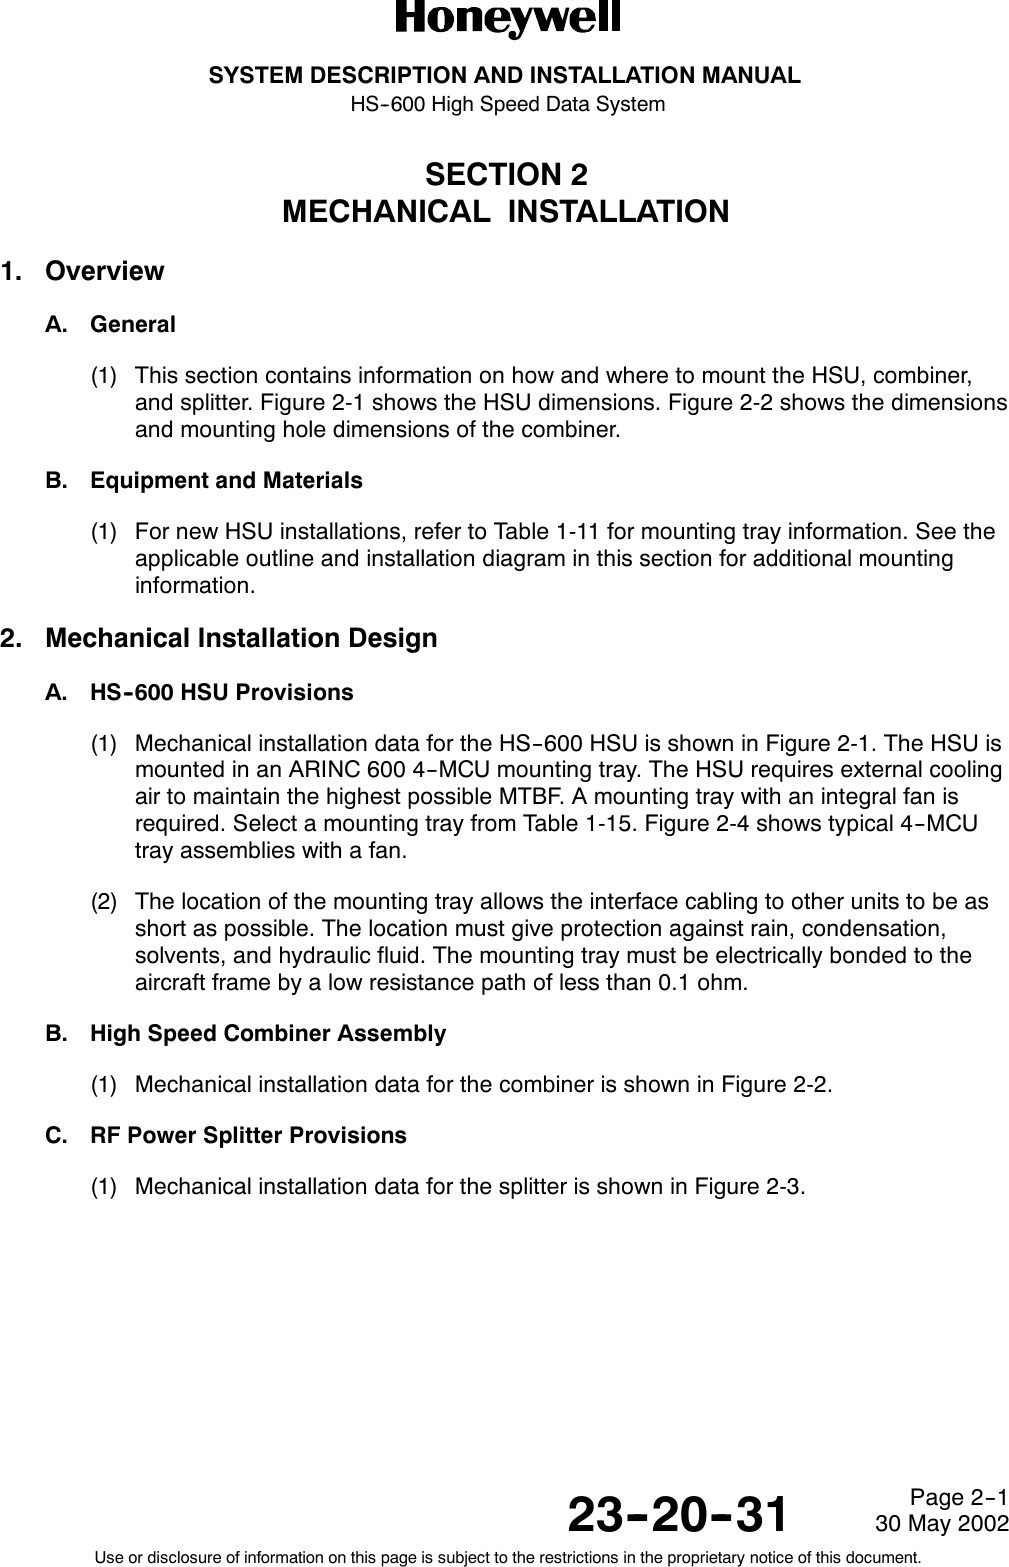 SYSTEM DESCRIPTION AND INSTALLATION MANUALHS--600 High Speed Data System23--20--3130 May 2002Use or disclosure of information on this page is subject to the restrictions in the proprietary notice of this document.Page 2--1SECTION 2MECHANICAL INSTALLATION1. OverviewA. General(1) This section contains information on how and where to mount the HSU, combiner,and splitter. Figure 2-1 shows the HSU dimensions. Figure 2-2 shows the dimensionsand mounting hole dimensions of the combiner.B. Equipment and Materials(1) For new HSU installations, refer to Table 1-11 for mounting tray information. See theapplicable outline and installation diagram in this section for additional mountinginformation.2. Mechanical Installation DesignA. HS--600 HSU Provisions(1) Mechanical installation data for the HS--600 HSU is shown in Figure 2-1. The HSU ismounted in an ARINC 600 4--MCU mounting tray. The HSU requires external coolingair to maintain the highest possible MTBF. A mounting tray with an integral fan isrequired. Select a mounting tray from Table 1-15. Figure 2-4 shows typical 4--MCUtray assemblies with a fan.(2) The location of the mounting tray allows the interface cabling to other units to be asshort as possible. The location must give protection against rain, condensation,solvents, and hydraulic fluid. The mounting tray must be electrically bonded to theaircraft frame by a low resistance path of less than 0.1 ohm.B. High Speed Combiner Assembly(1) Mechanical installation data for the combiner is shown in Figure 2-2.C. RF Power Splitter Provisions(1) Mechanical installation data for the splitter is shown in Figure 2-3.